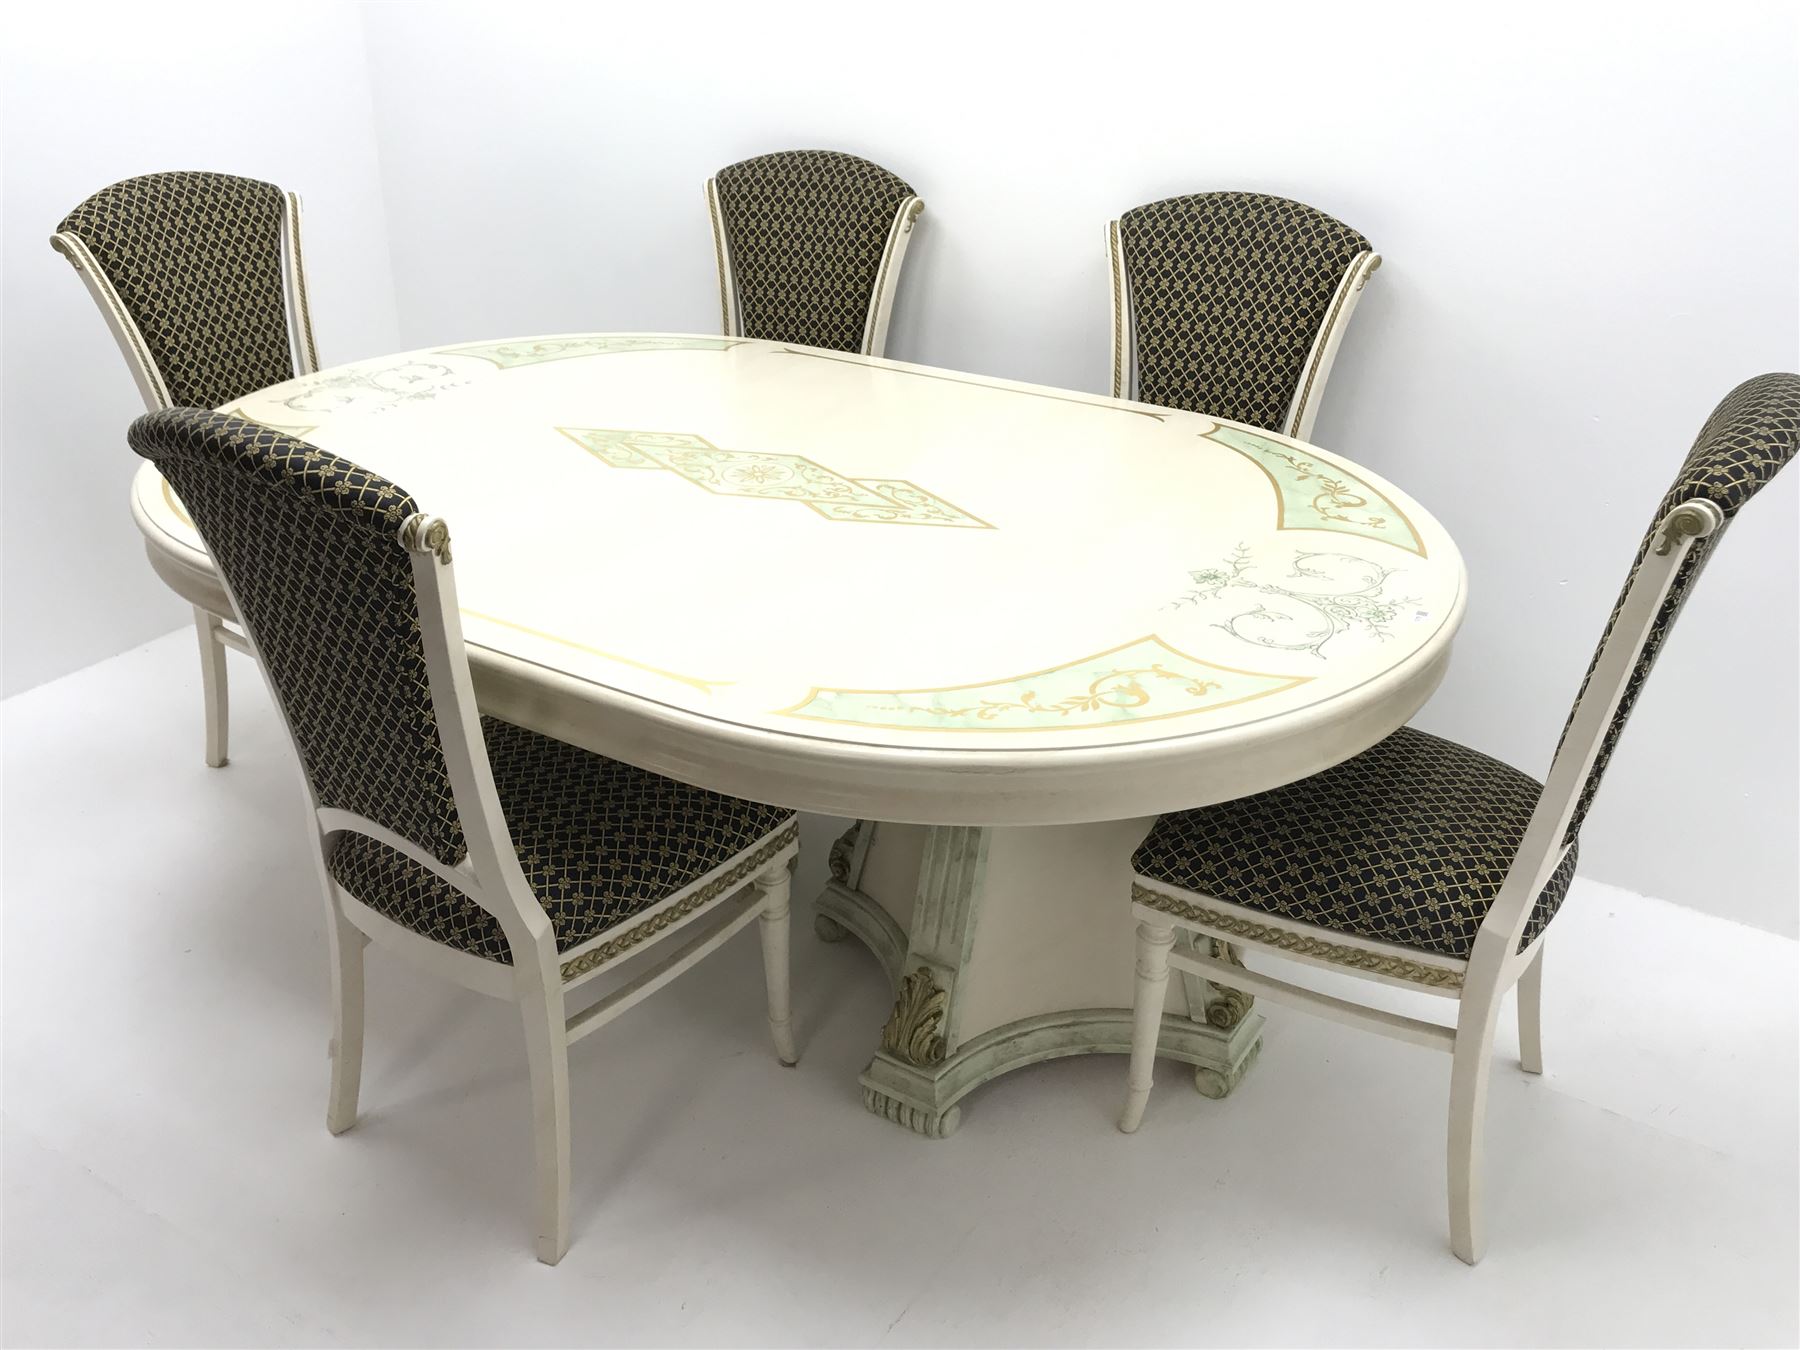 Italian style dining table - Image 4 of 4